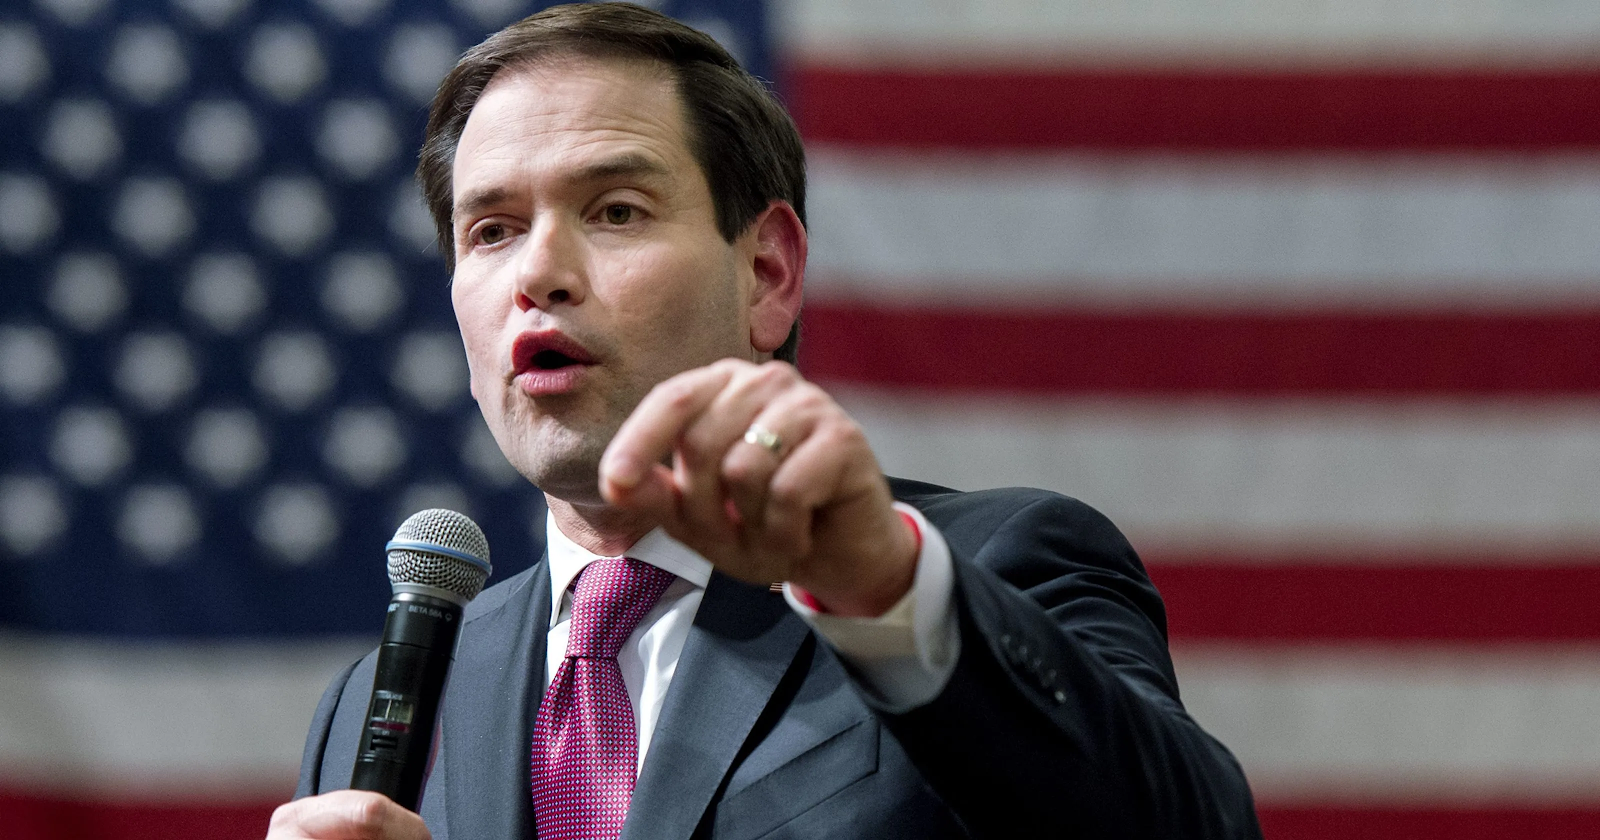 Senator Marco Rubio Wants to Change How Student Loans Are Paid